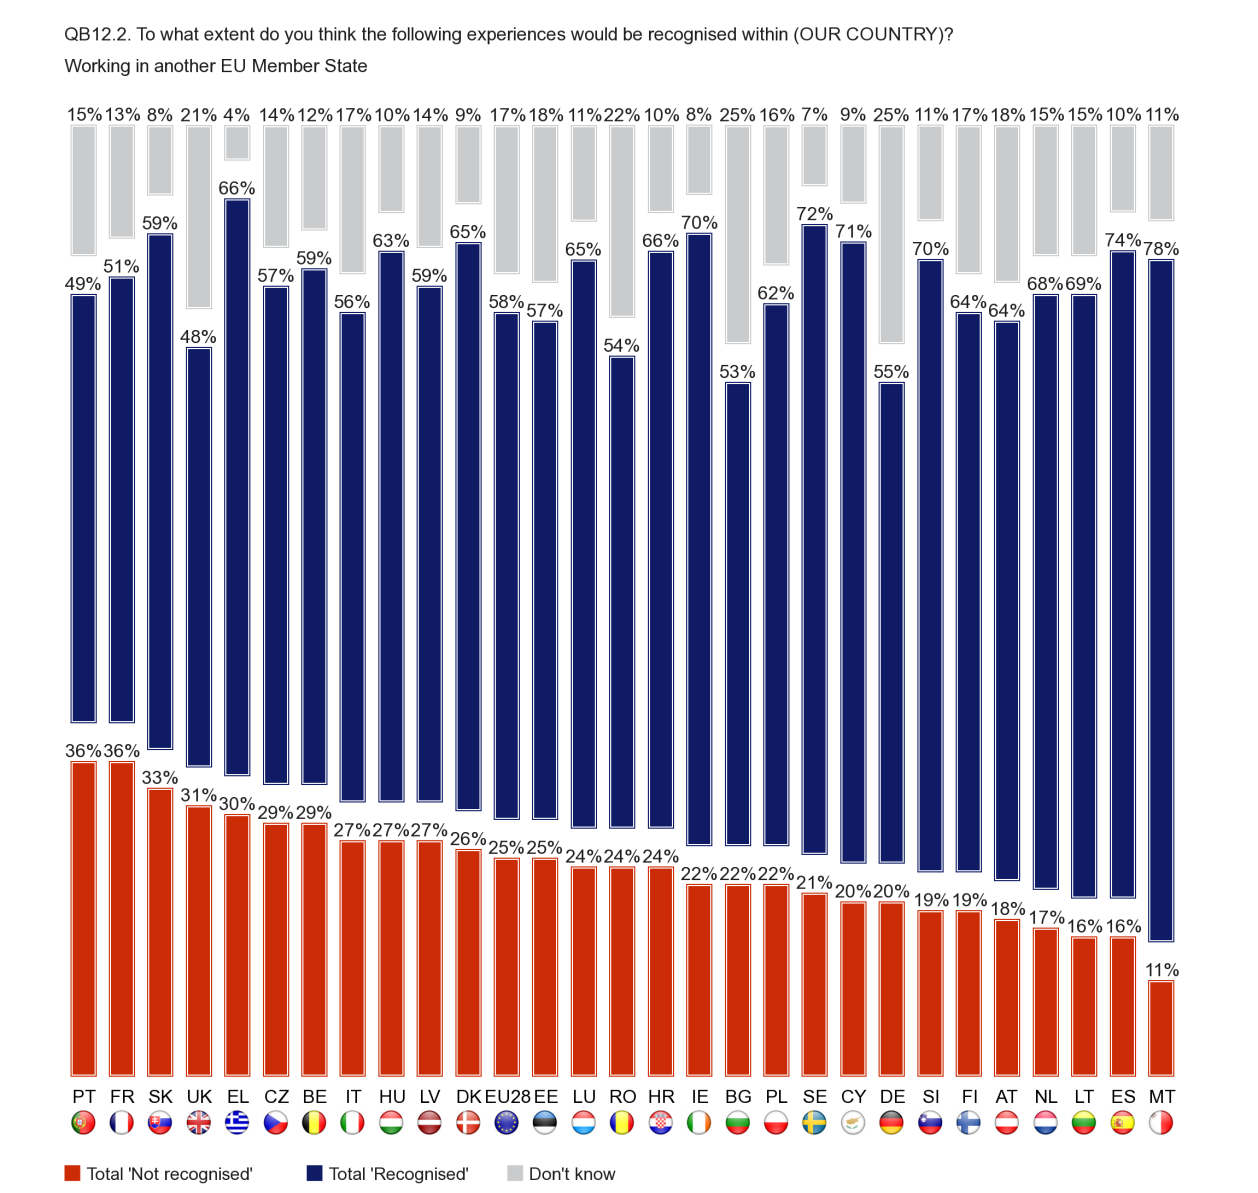 In relation to working in another EU Member State, the findings across individual Member States are broadly similar to those seen above in relation to studying.